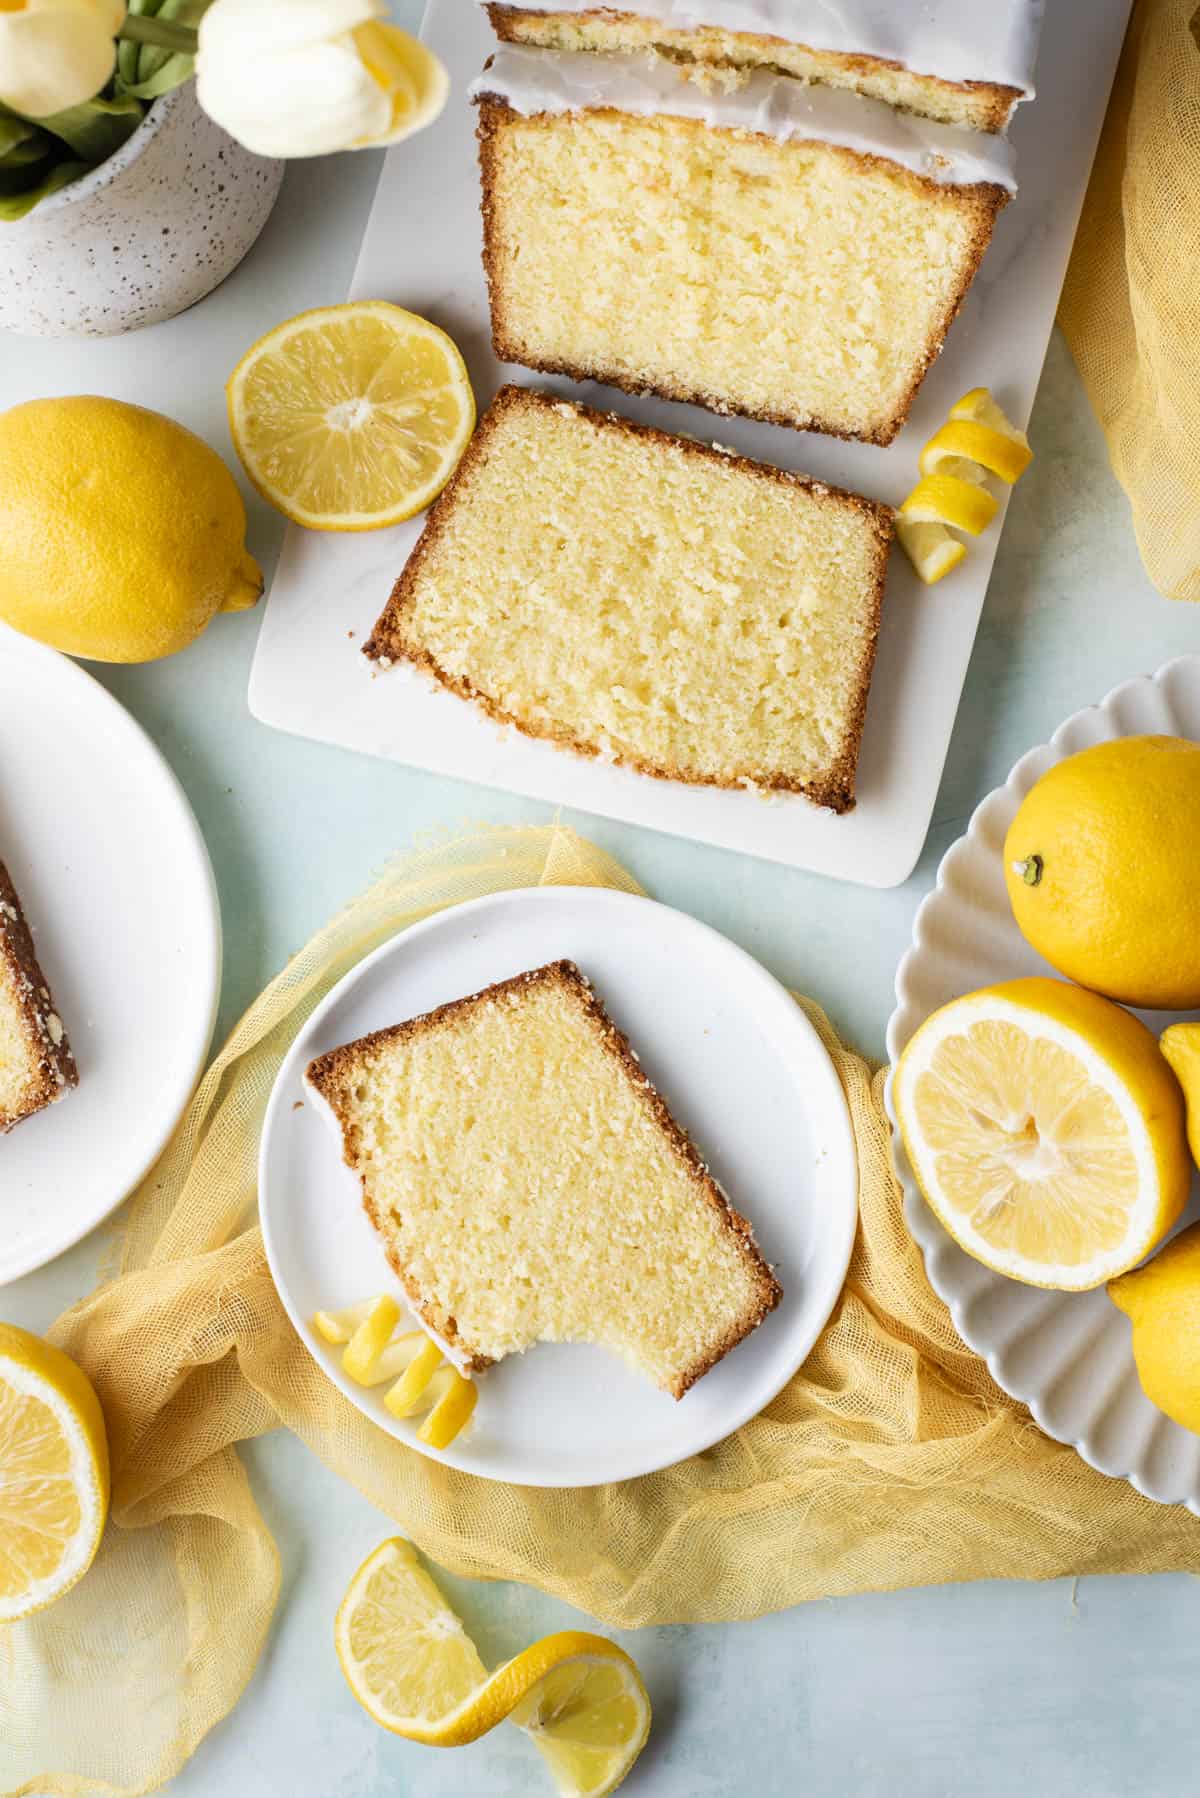 over head view of a lemon pound cake sliced on a white cutting board on a light blue surface surrounded by small white plates with slices of cake on them, fresh whole lemonds, lemon slices and peels and fresh flowers